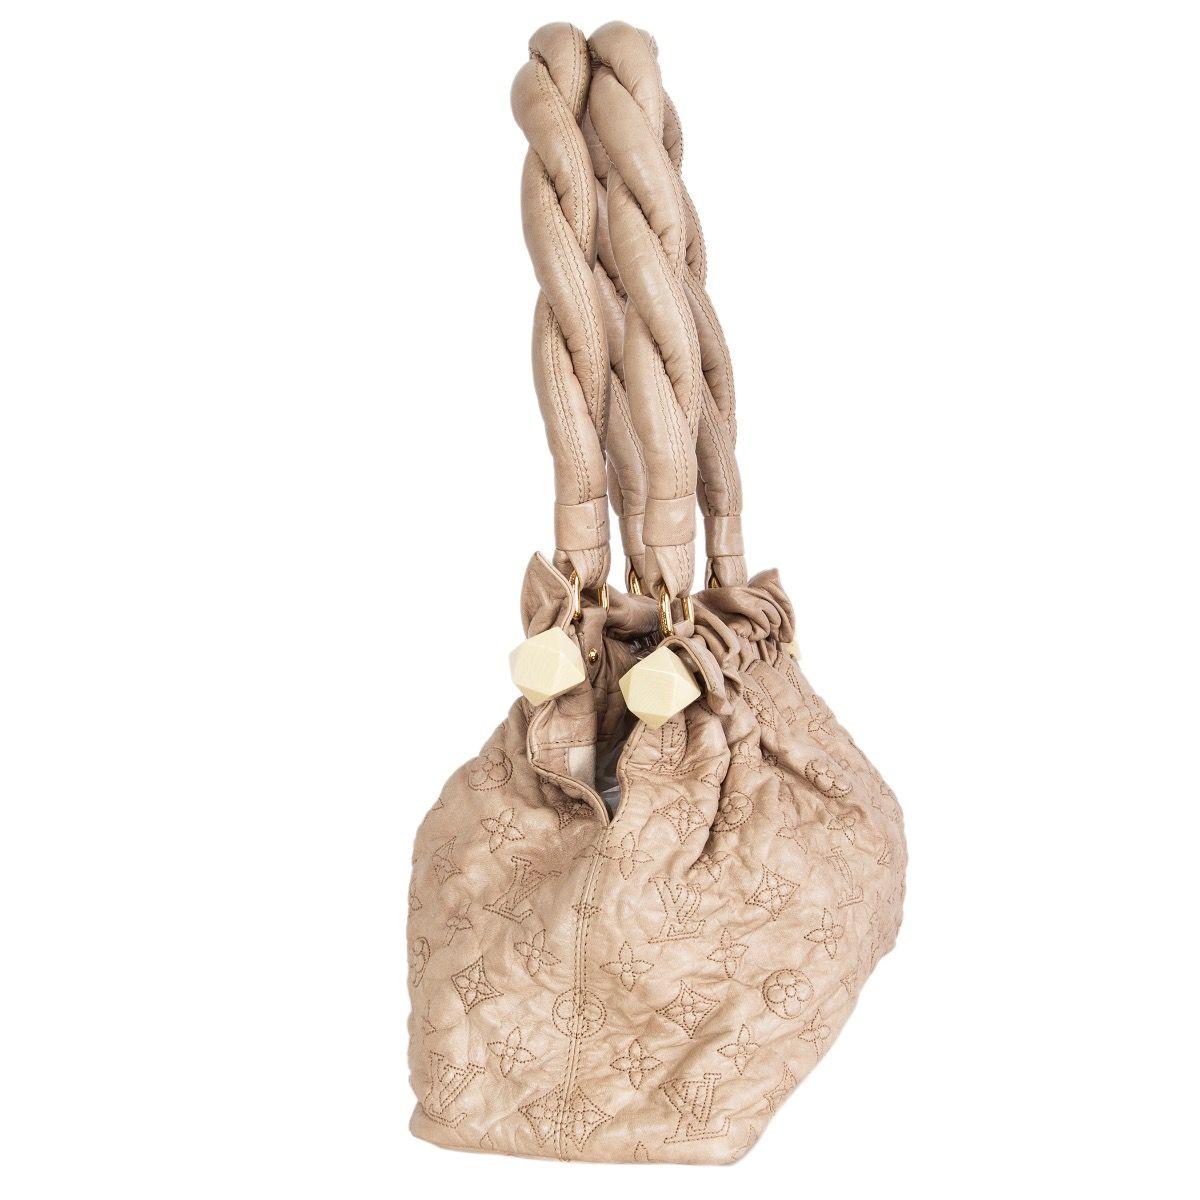  Louis Vuitton ' Stratus Olympe PM' Limited Edition bag in beige soft lambskin with intricate monogram stitched. featuring double braided ultra thick leather handles. Opens with a snap closure to a off-white microfibre lining with a zipper pocket